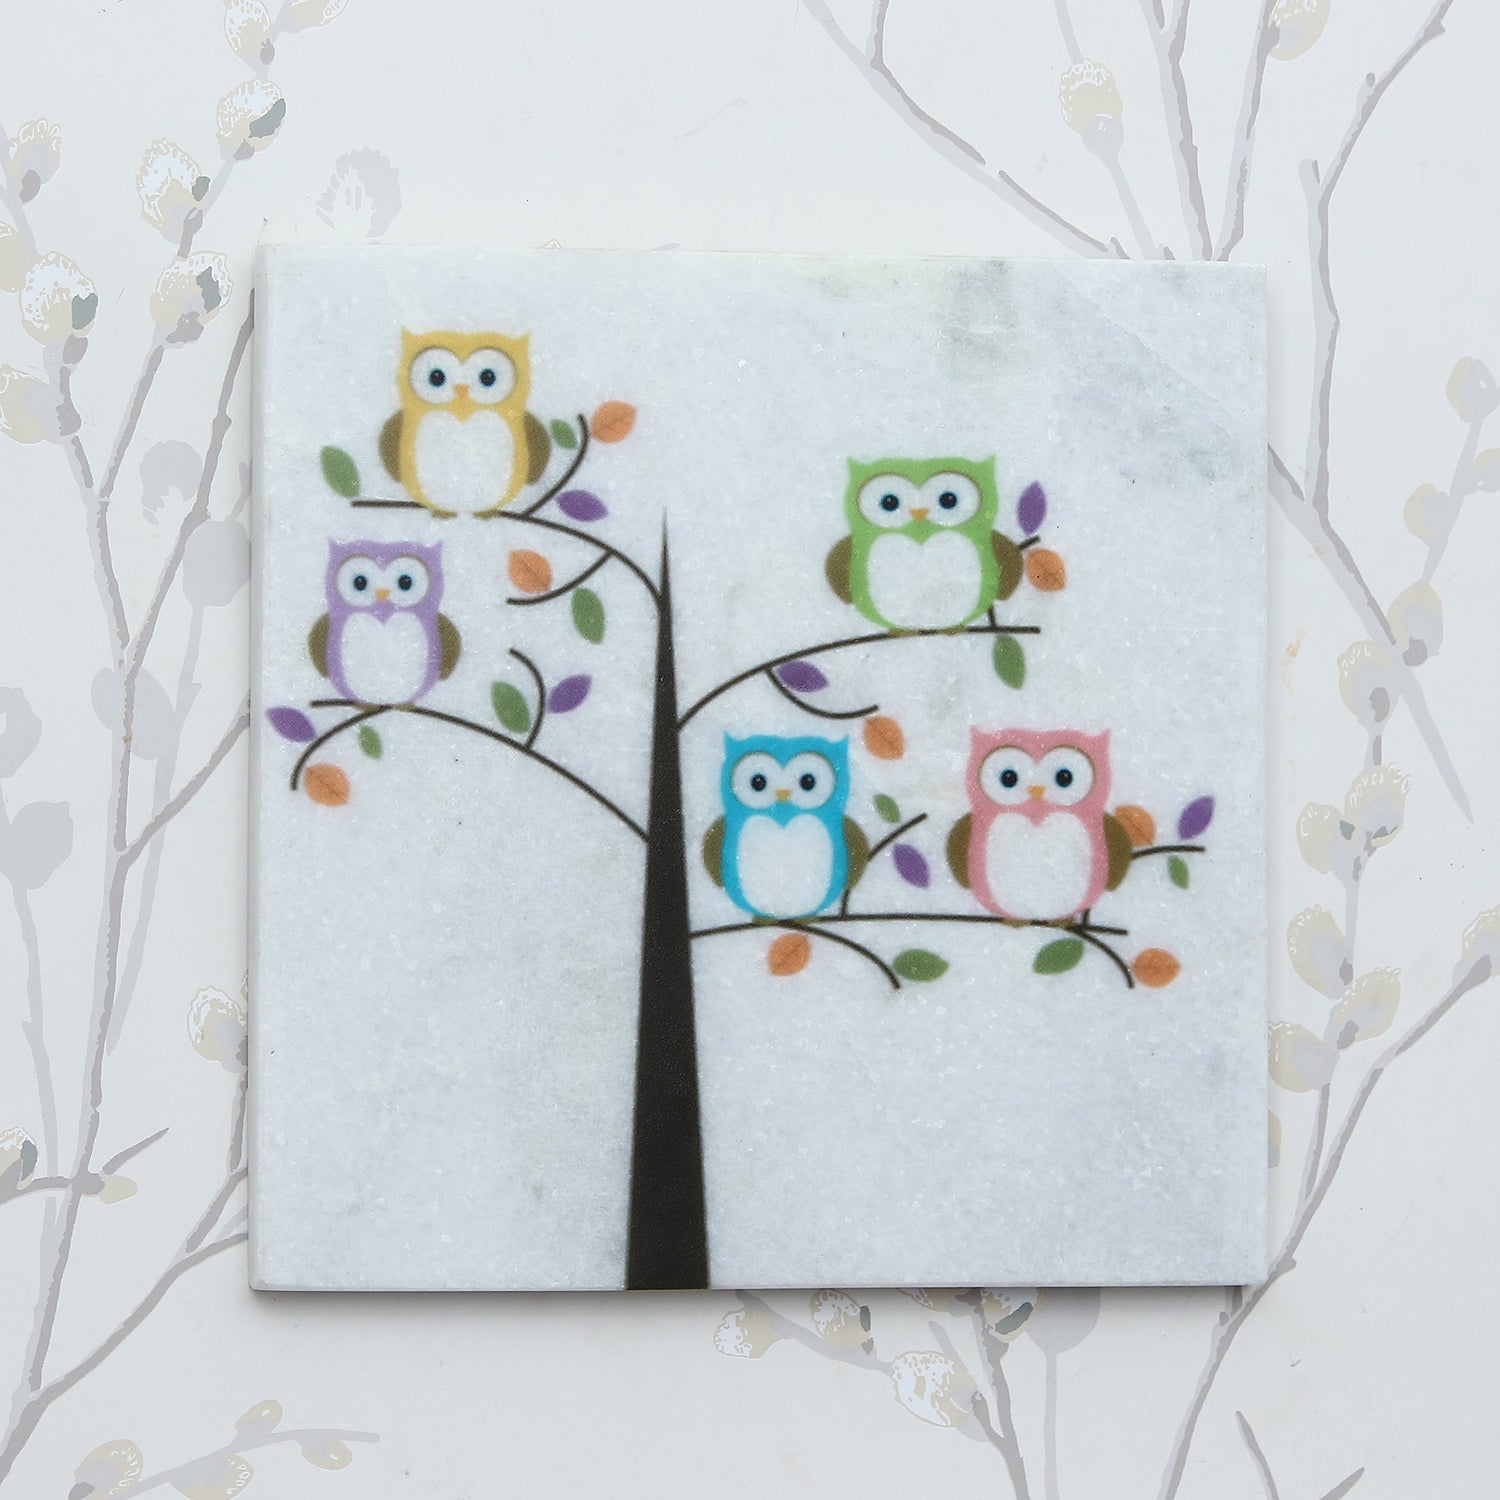 Colorful Owls sitting on a Tree Painting On Marble Square Tile 6